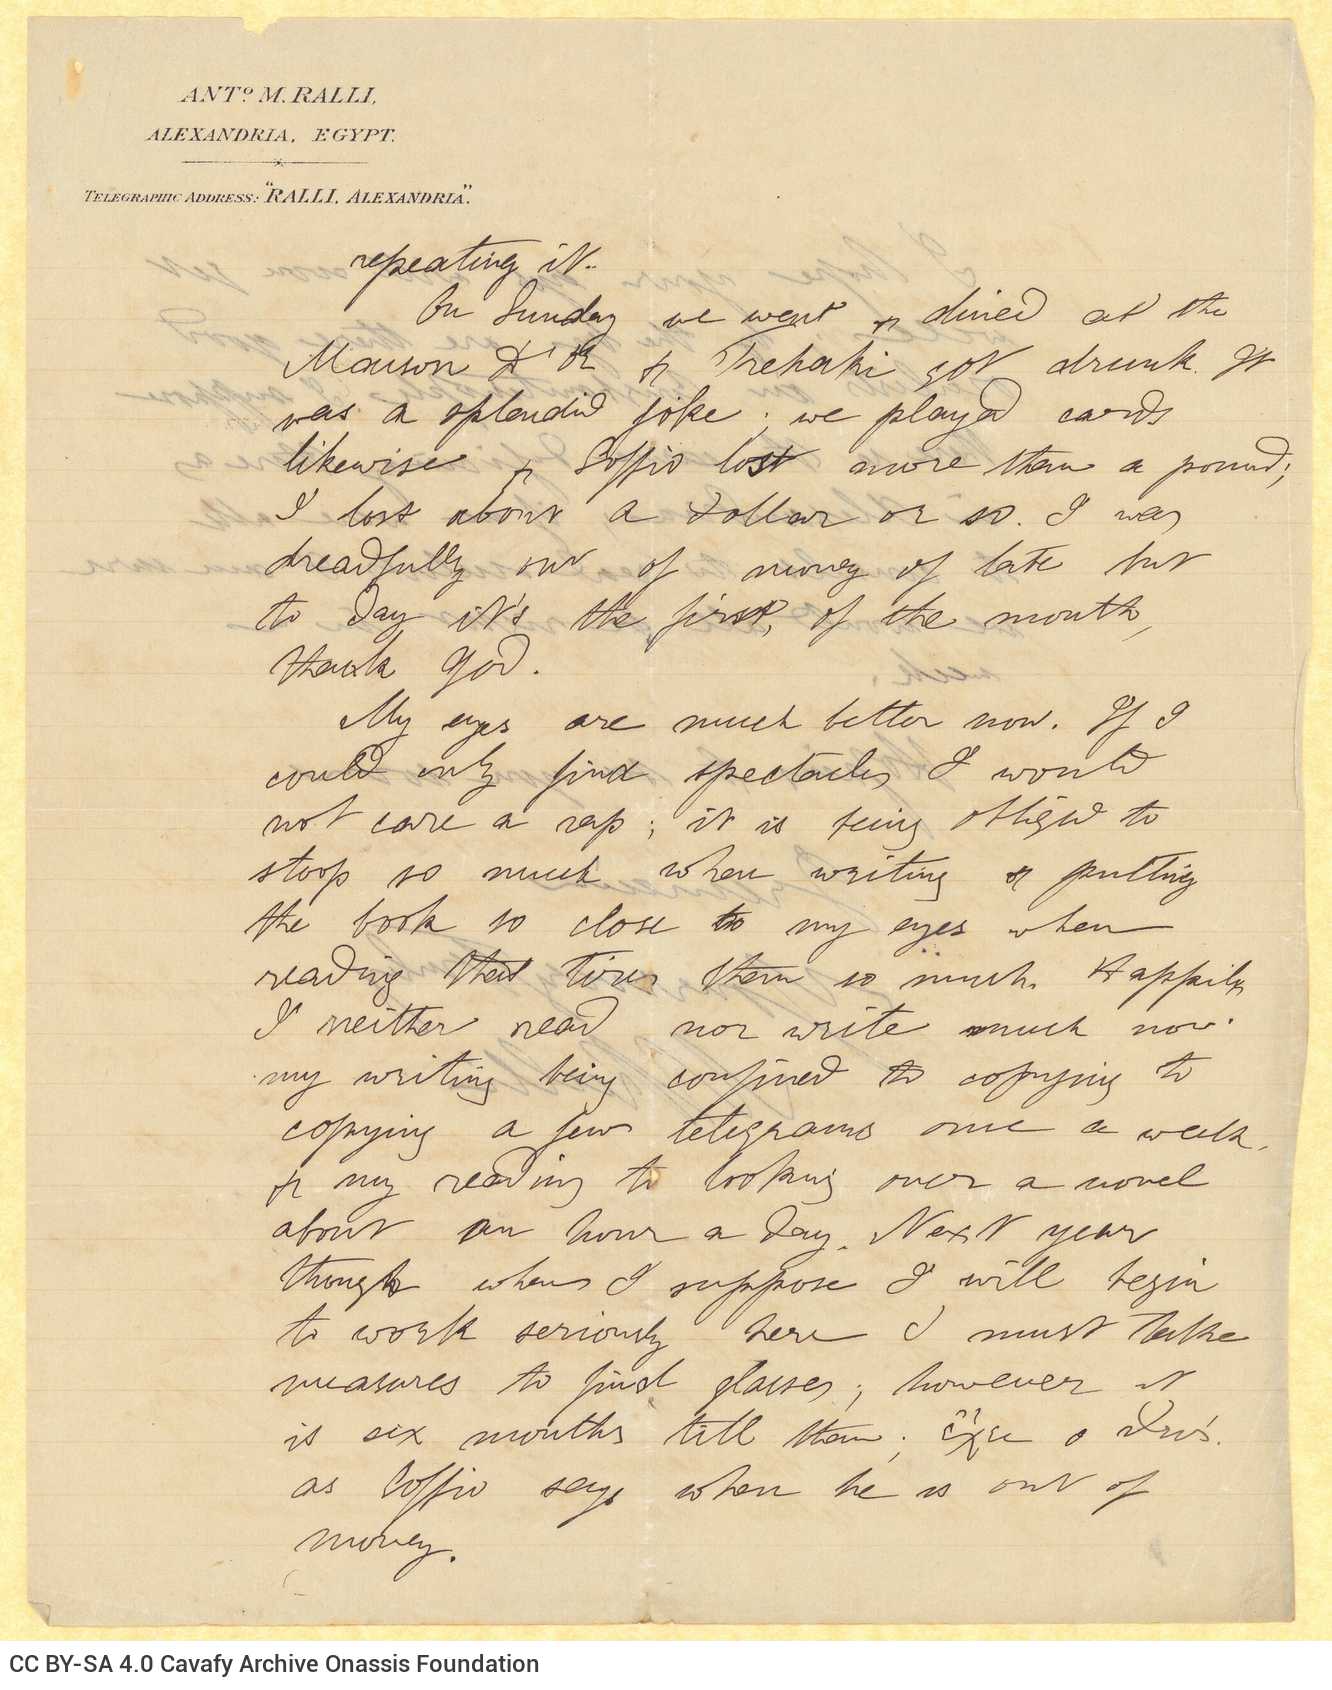 Handwritten letter by Mike Ralli to Cavafy on two sheets, with notes on all sides. Extensive commentary on the vision problem